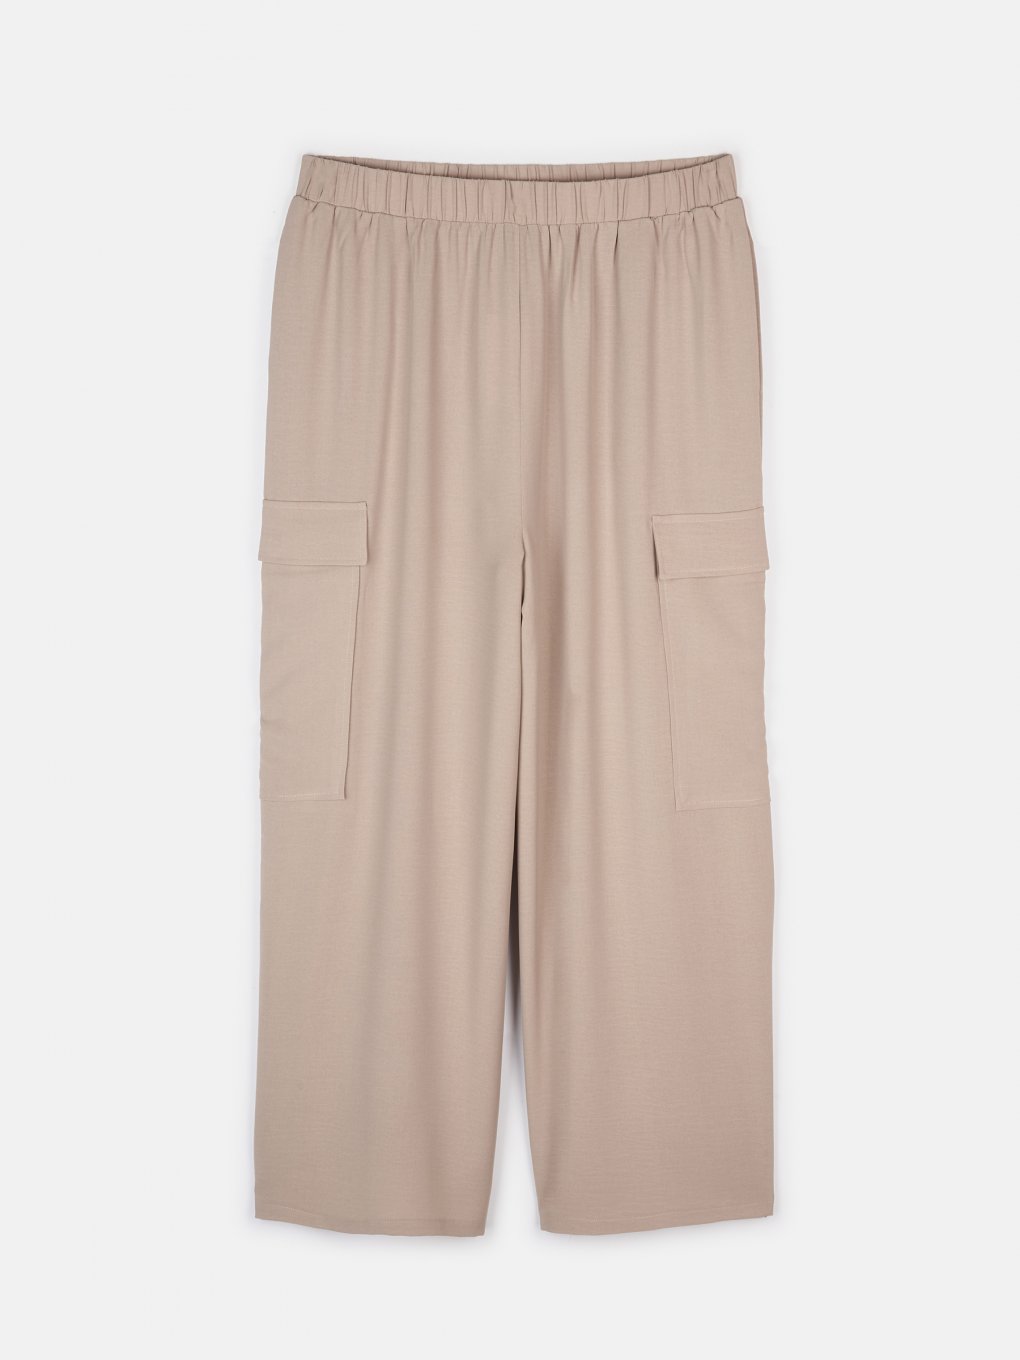 Plus size pants with pockets